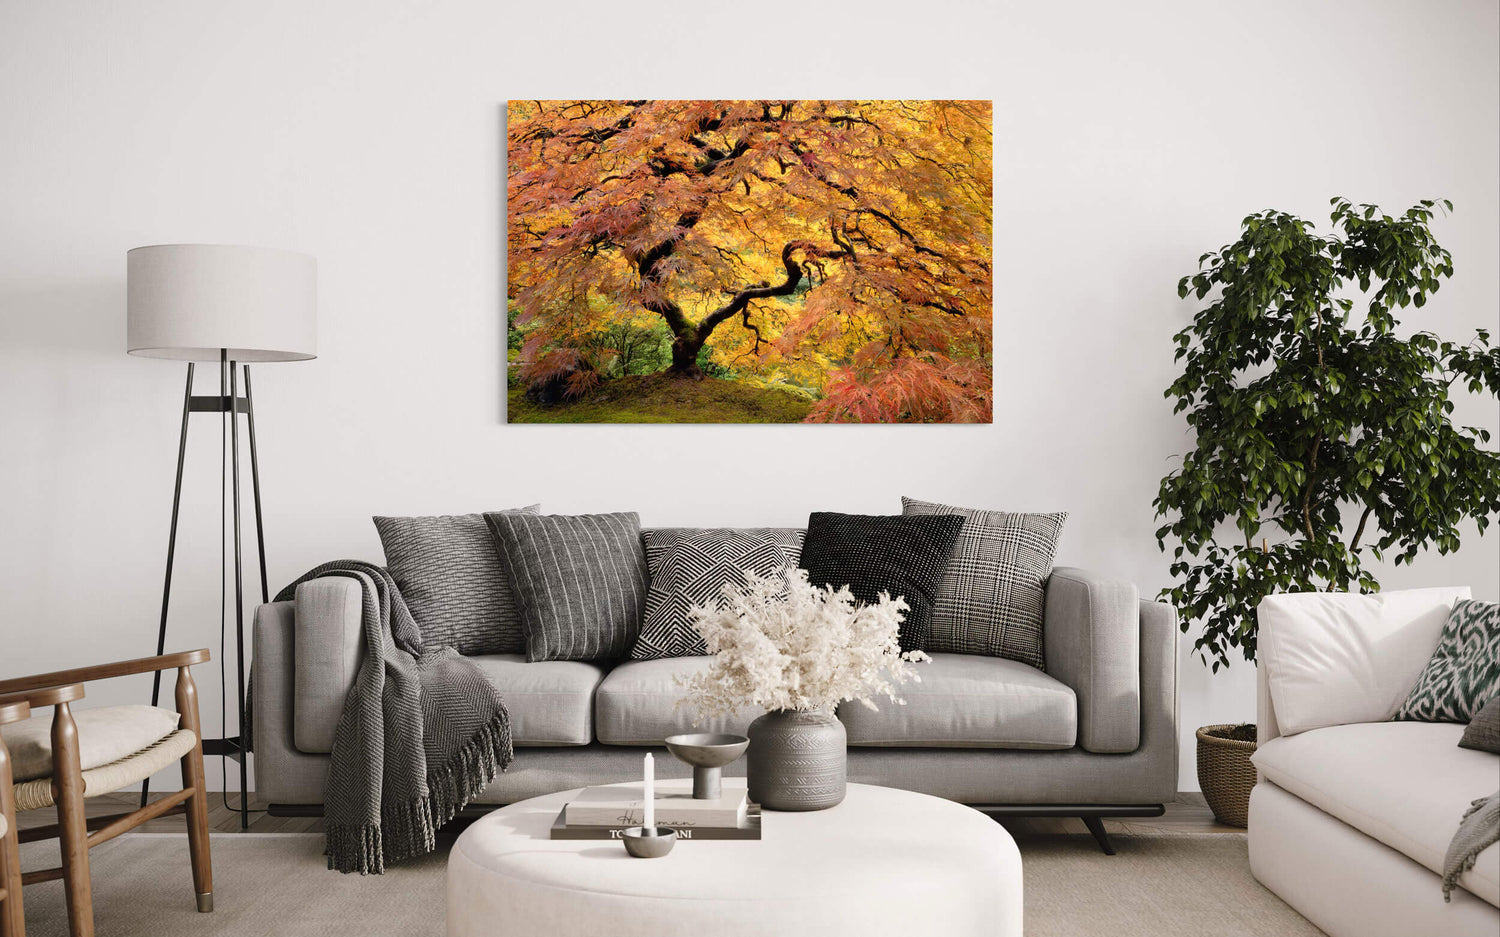 A piece of japanese garden art showing the Portland maple hangs in a living room.